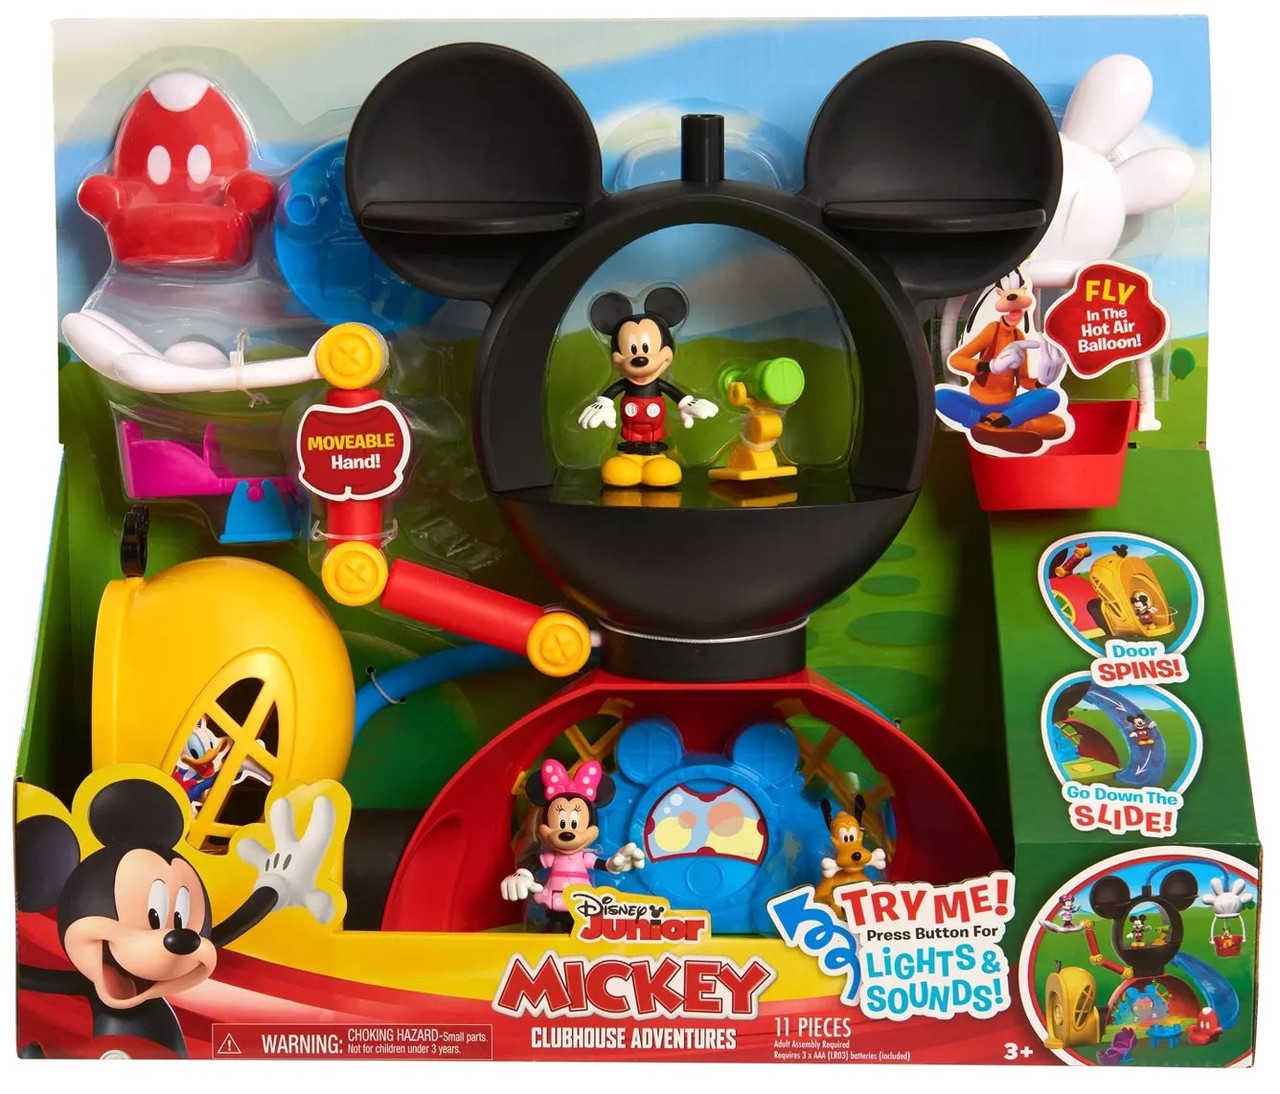 Disney Mickey Mouse Clubhouse Adventures Playset - ToyWiz